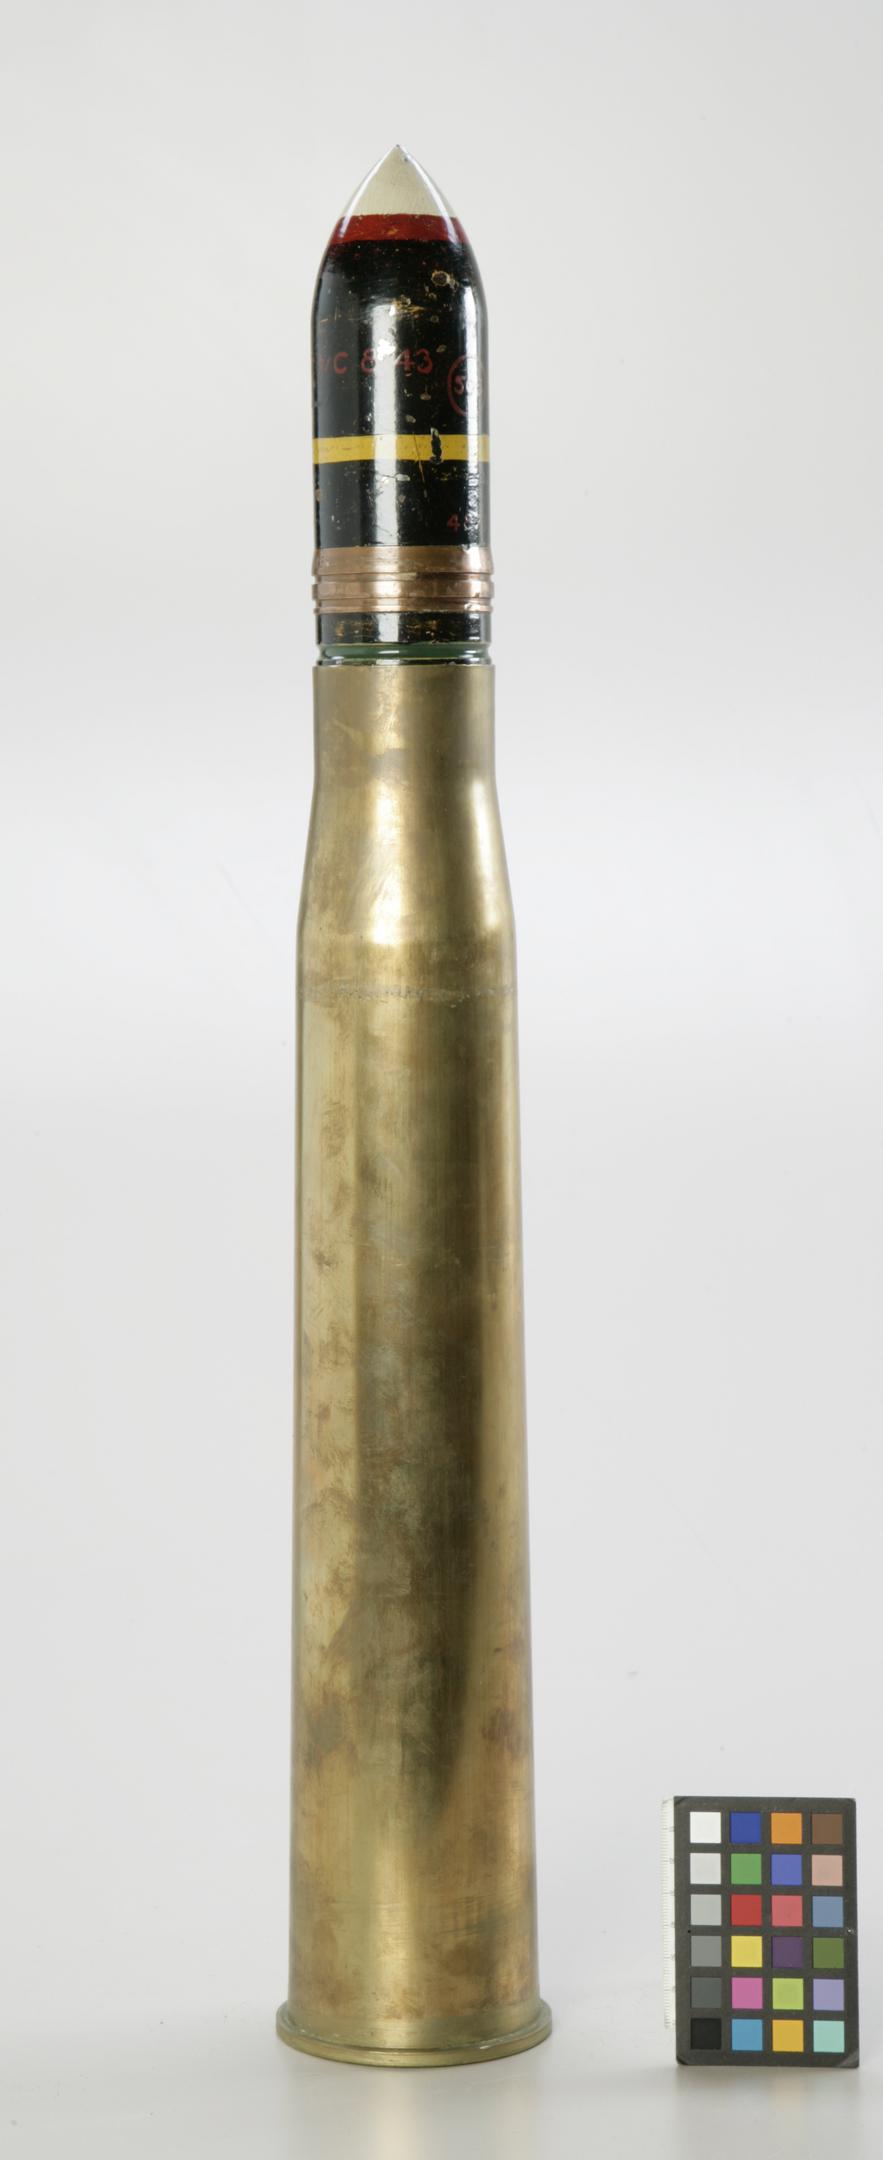 WW1 artillery shell identification - Arms and other weapons - The